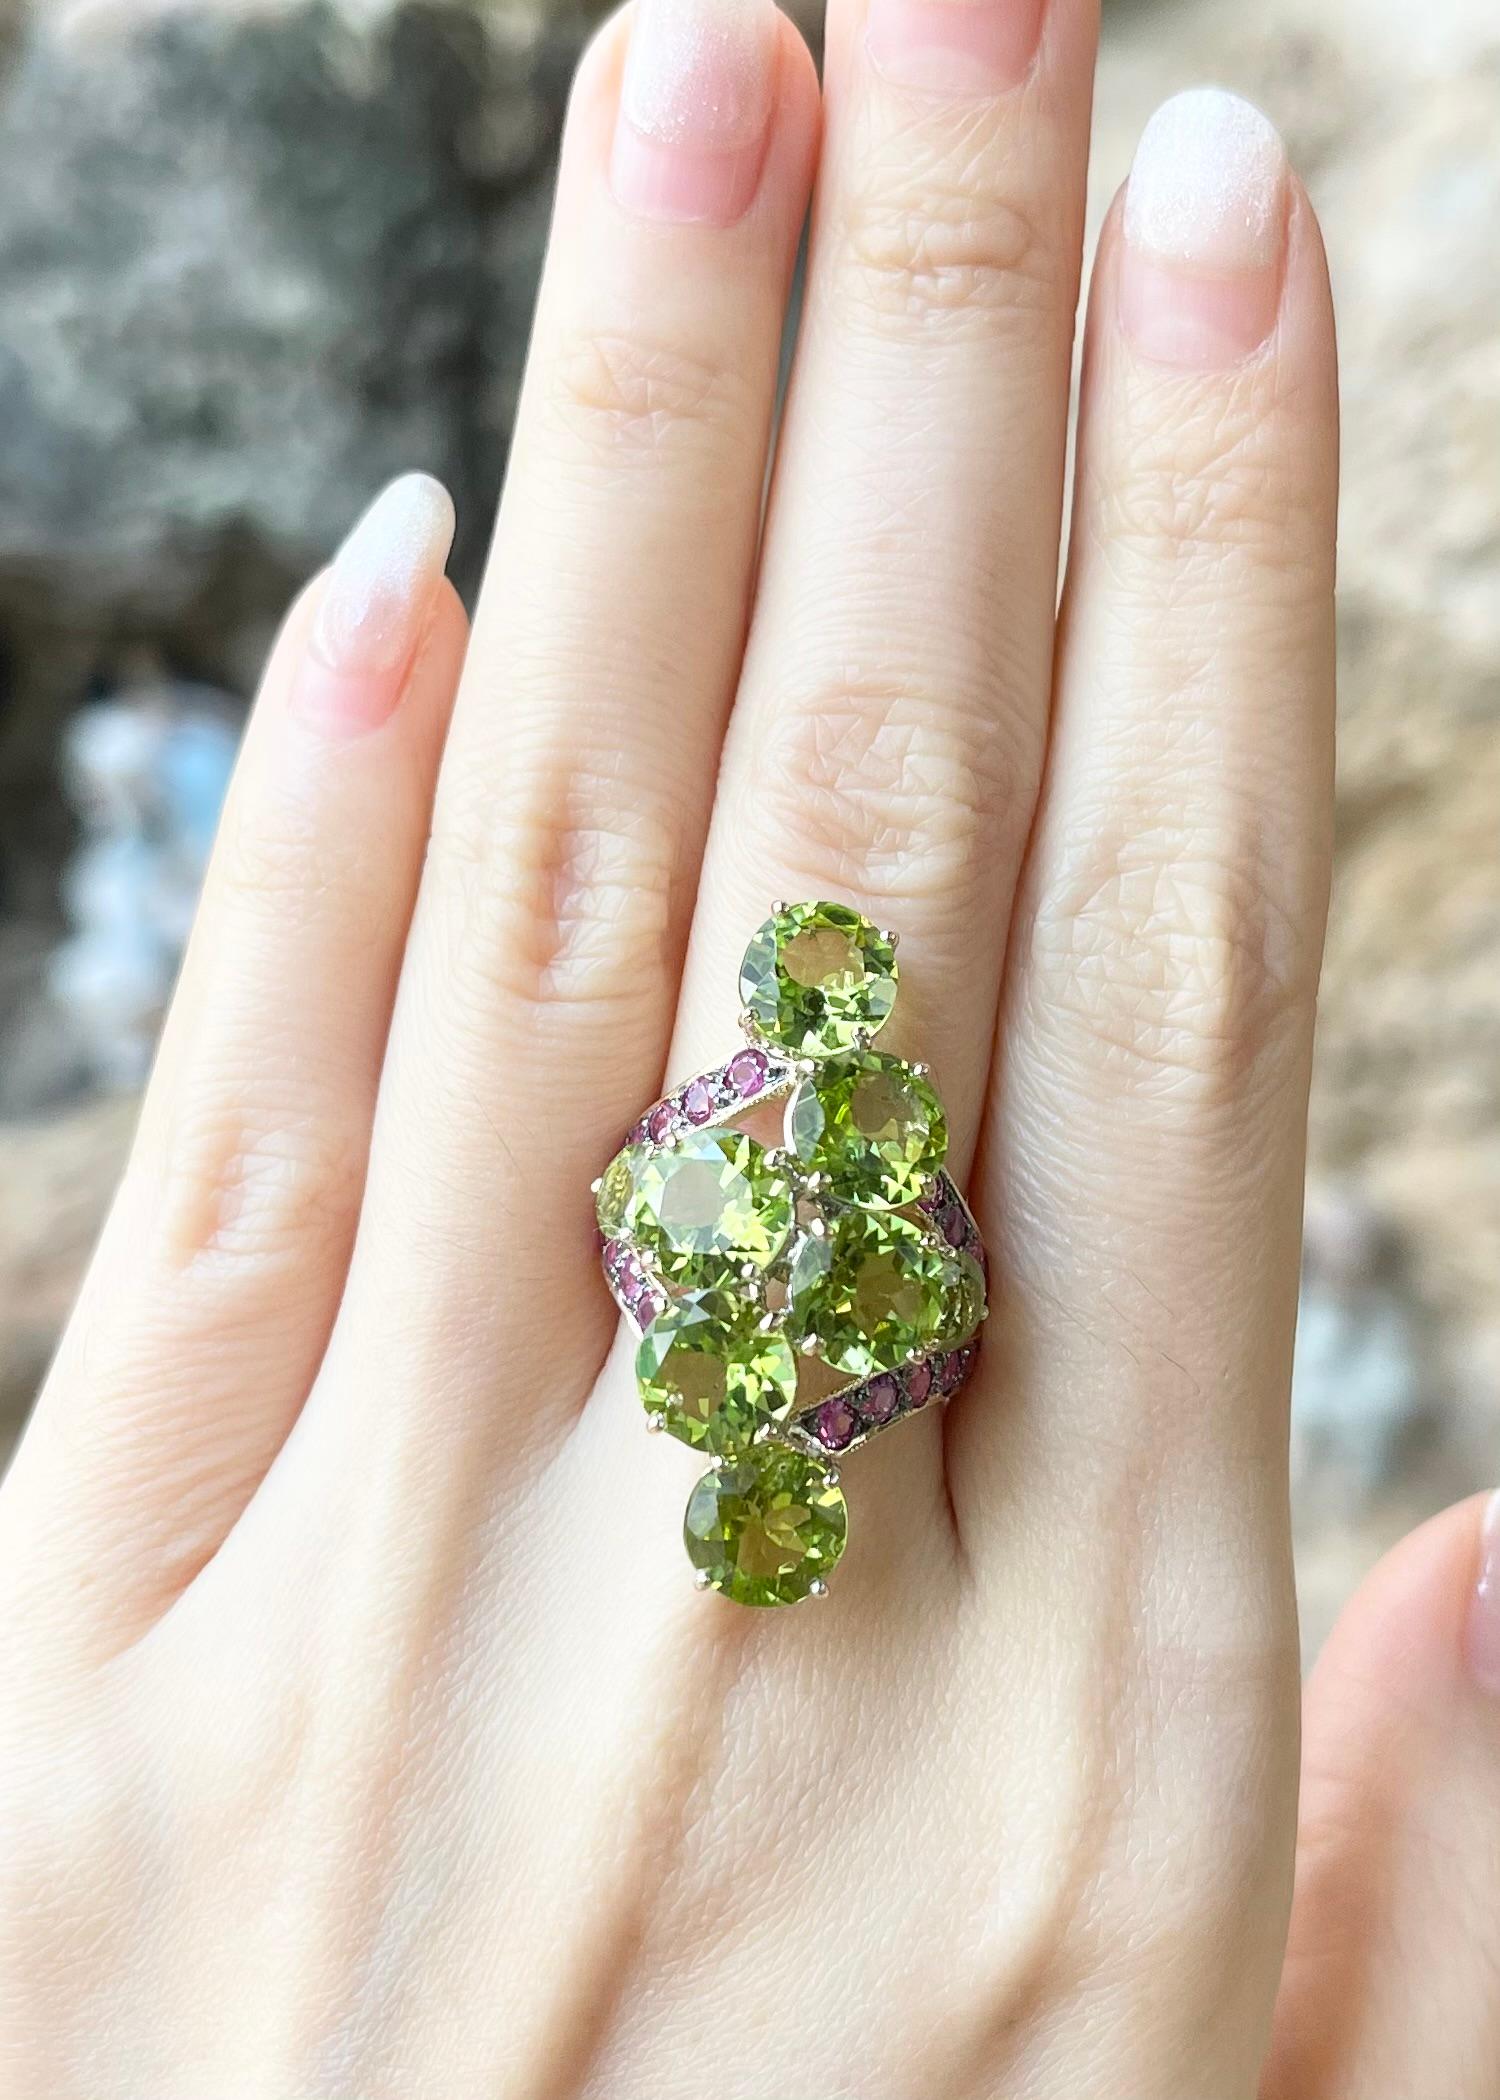 Peridot 11.37 carats with Pink Sapphire 1.35 carats Ring set in 18K Gold Settings

Width:  2.0 cm 
Length: 3.4 cm
Ring Size: 53
Total Weight: 12.03 grams

